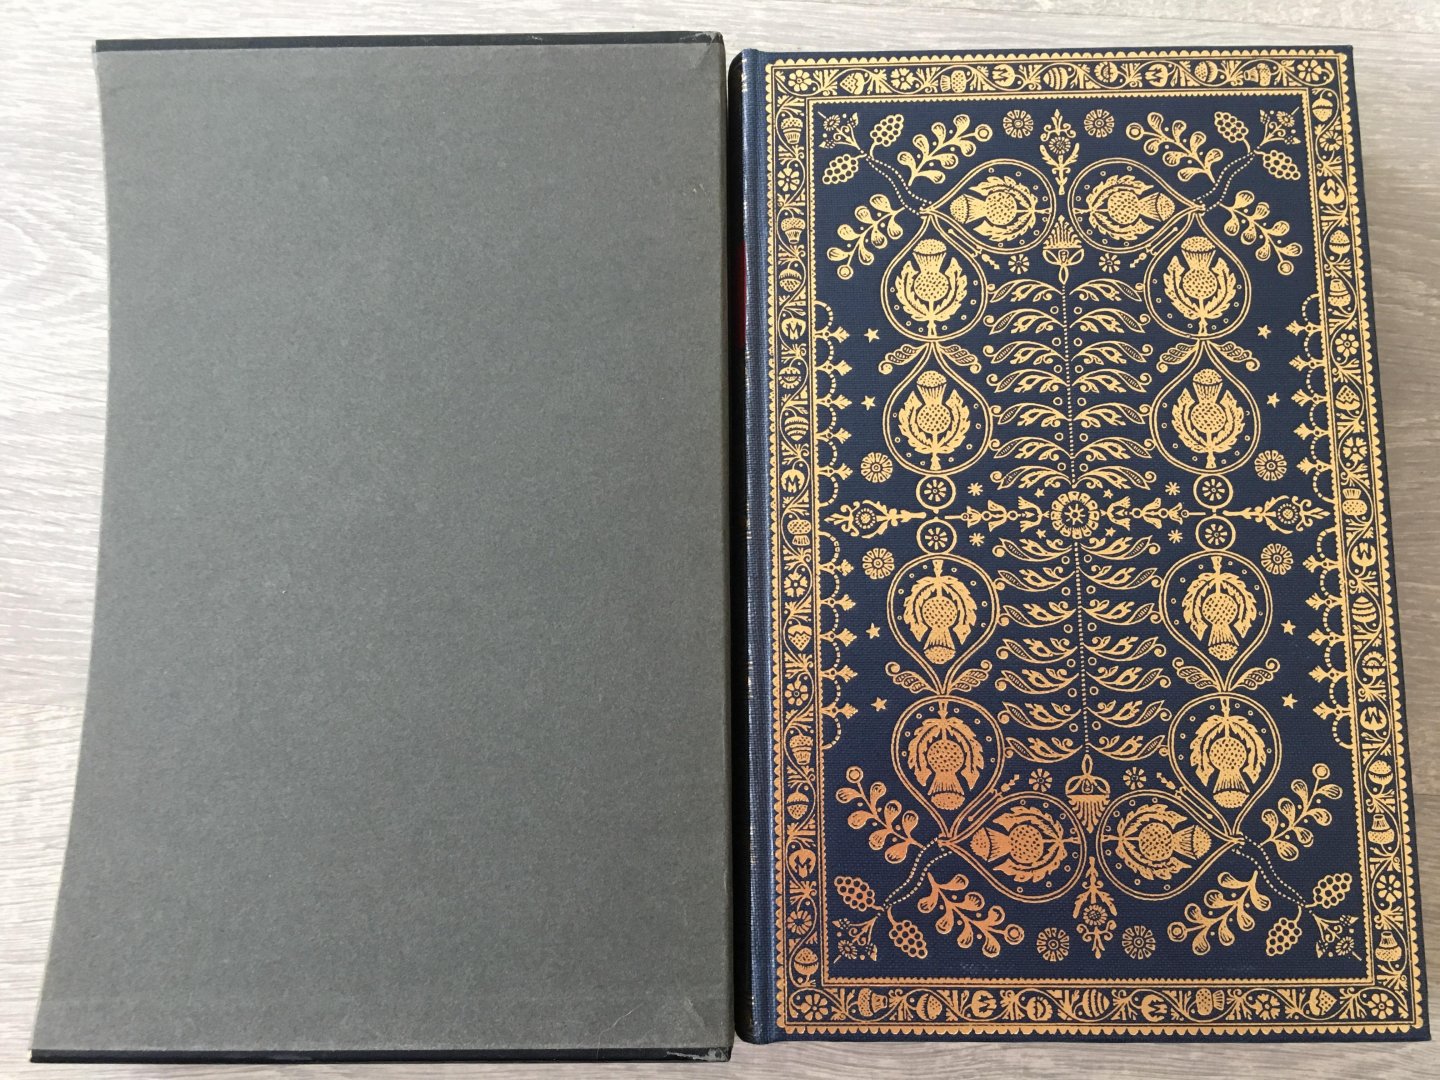 Edited with an Introduction by Brian Rawson - The Folio Society; The Chevalier de Johnstone, A memoir of the forty-five